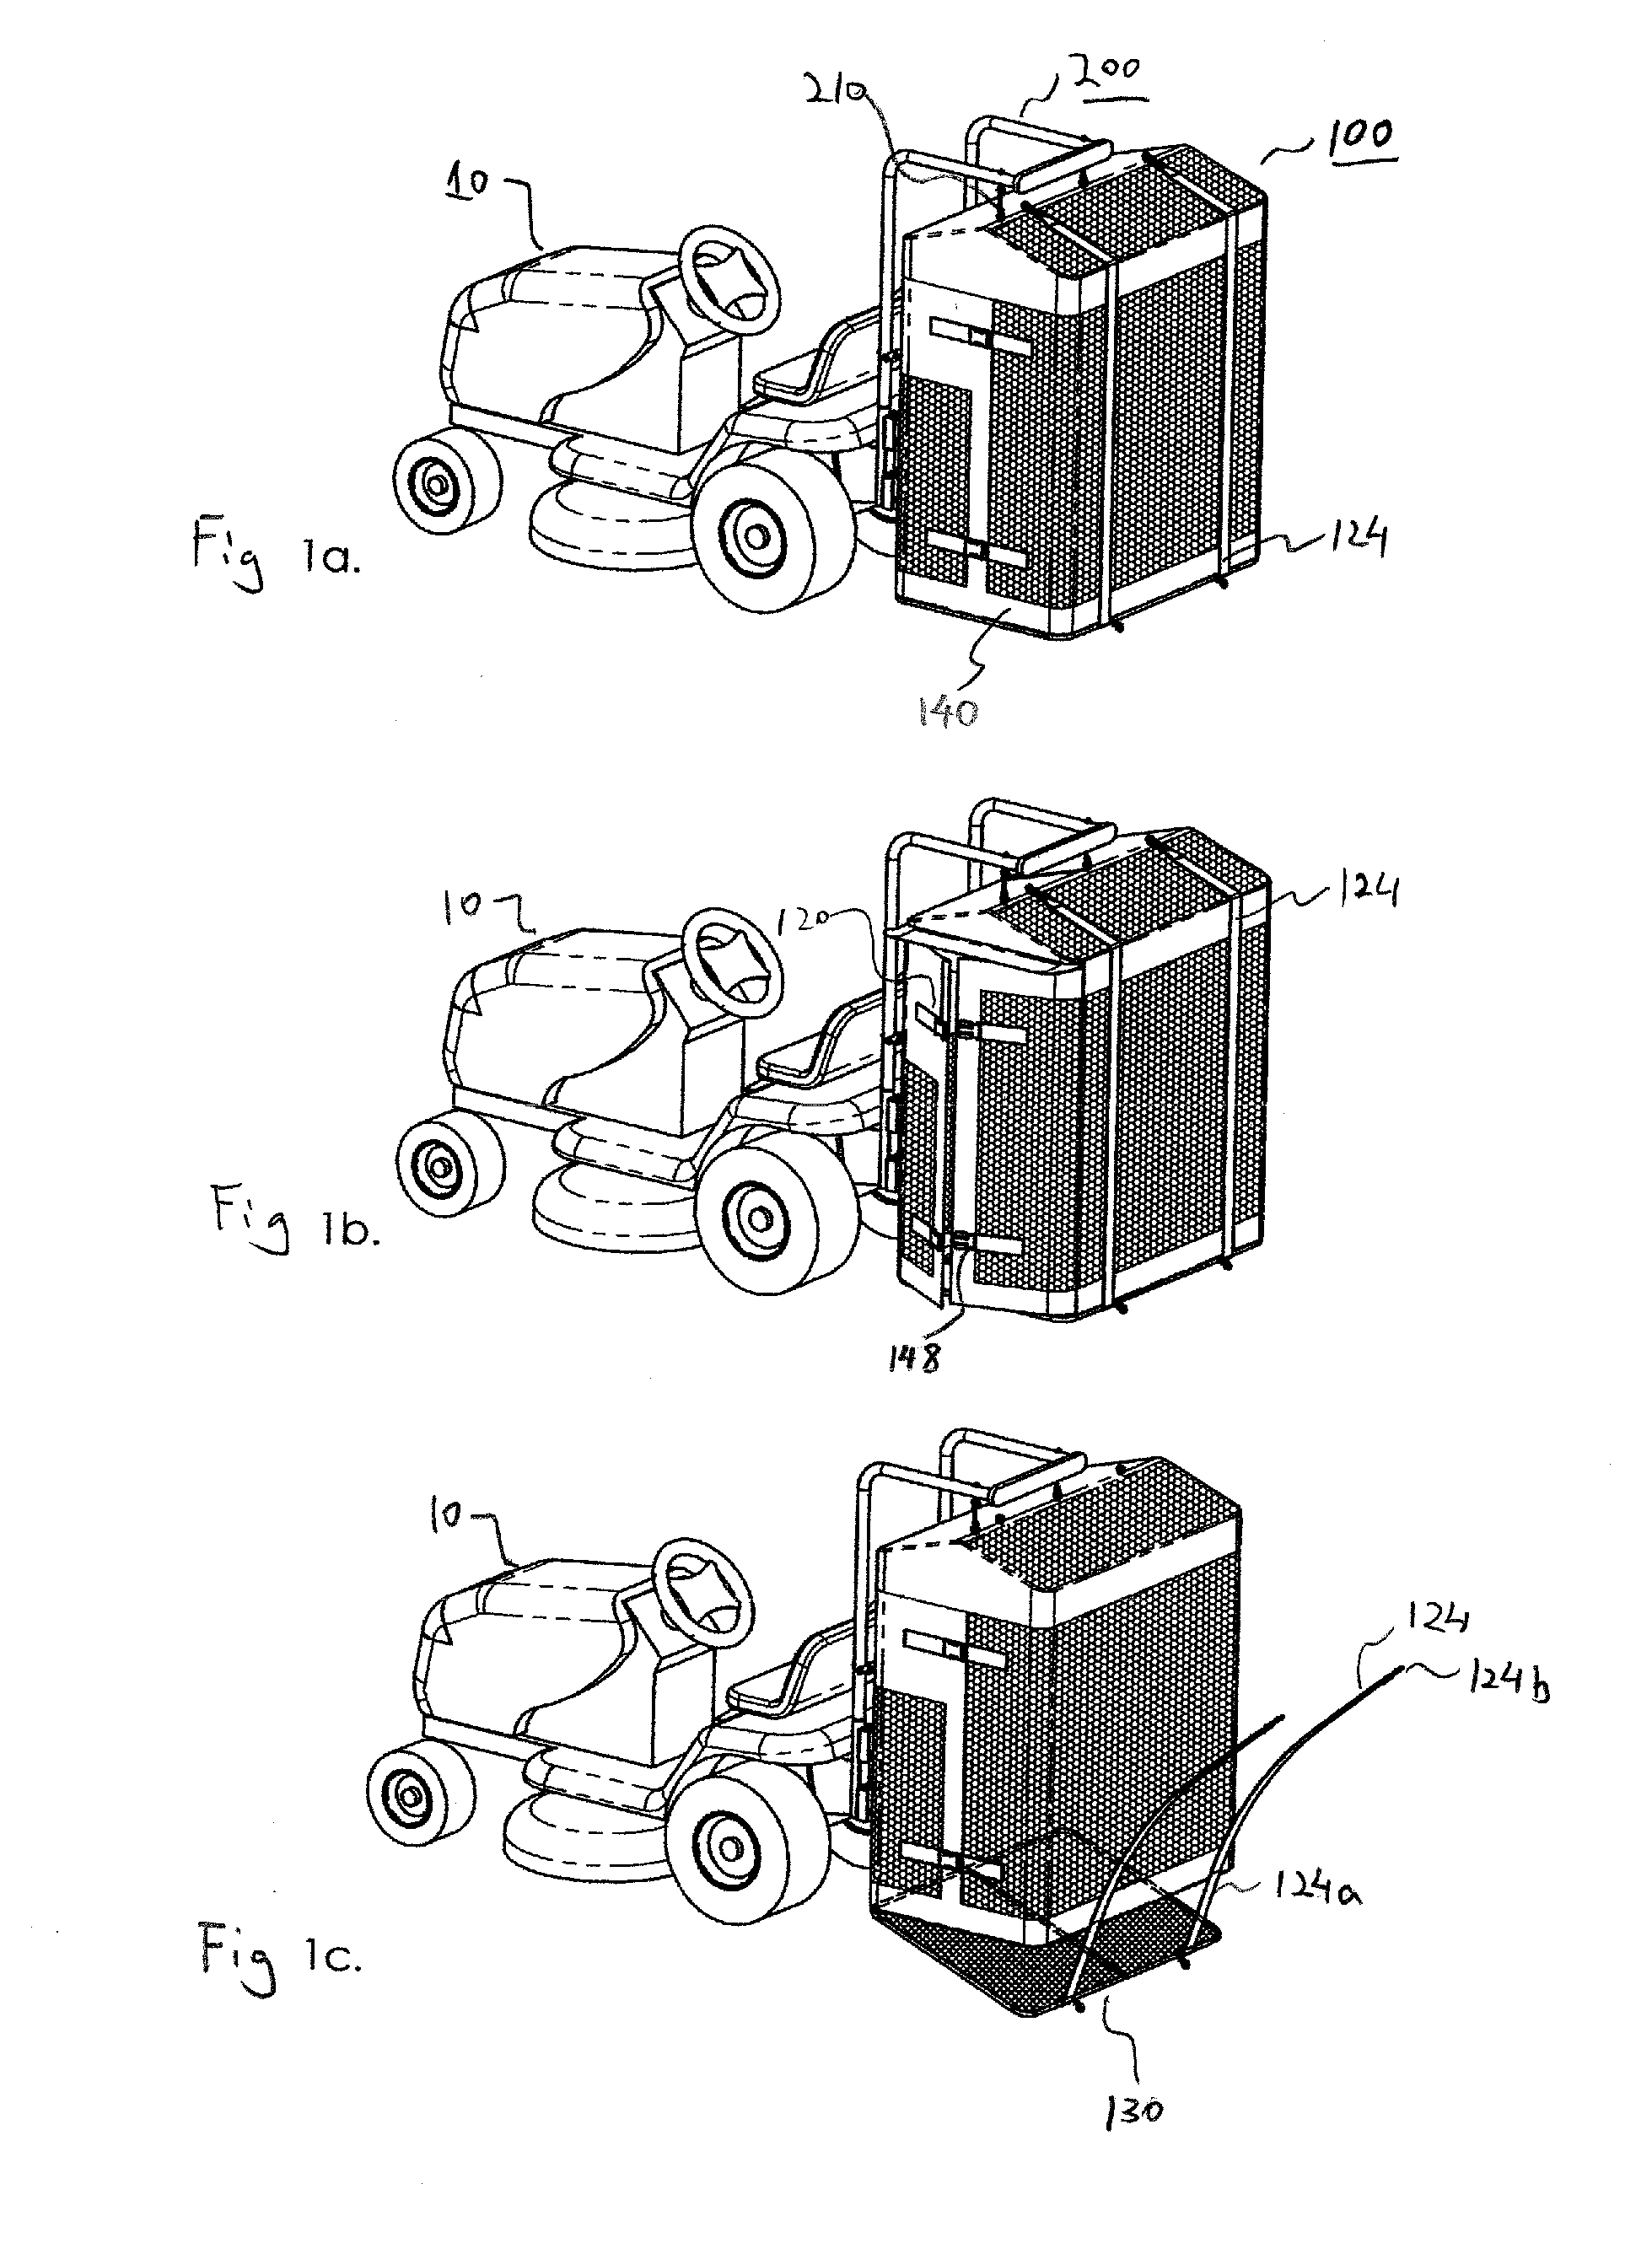 Yard waste collection system, collection apparatus, and method for collecting yard waste